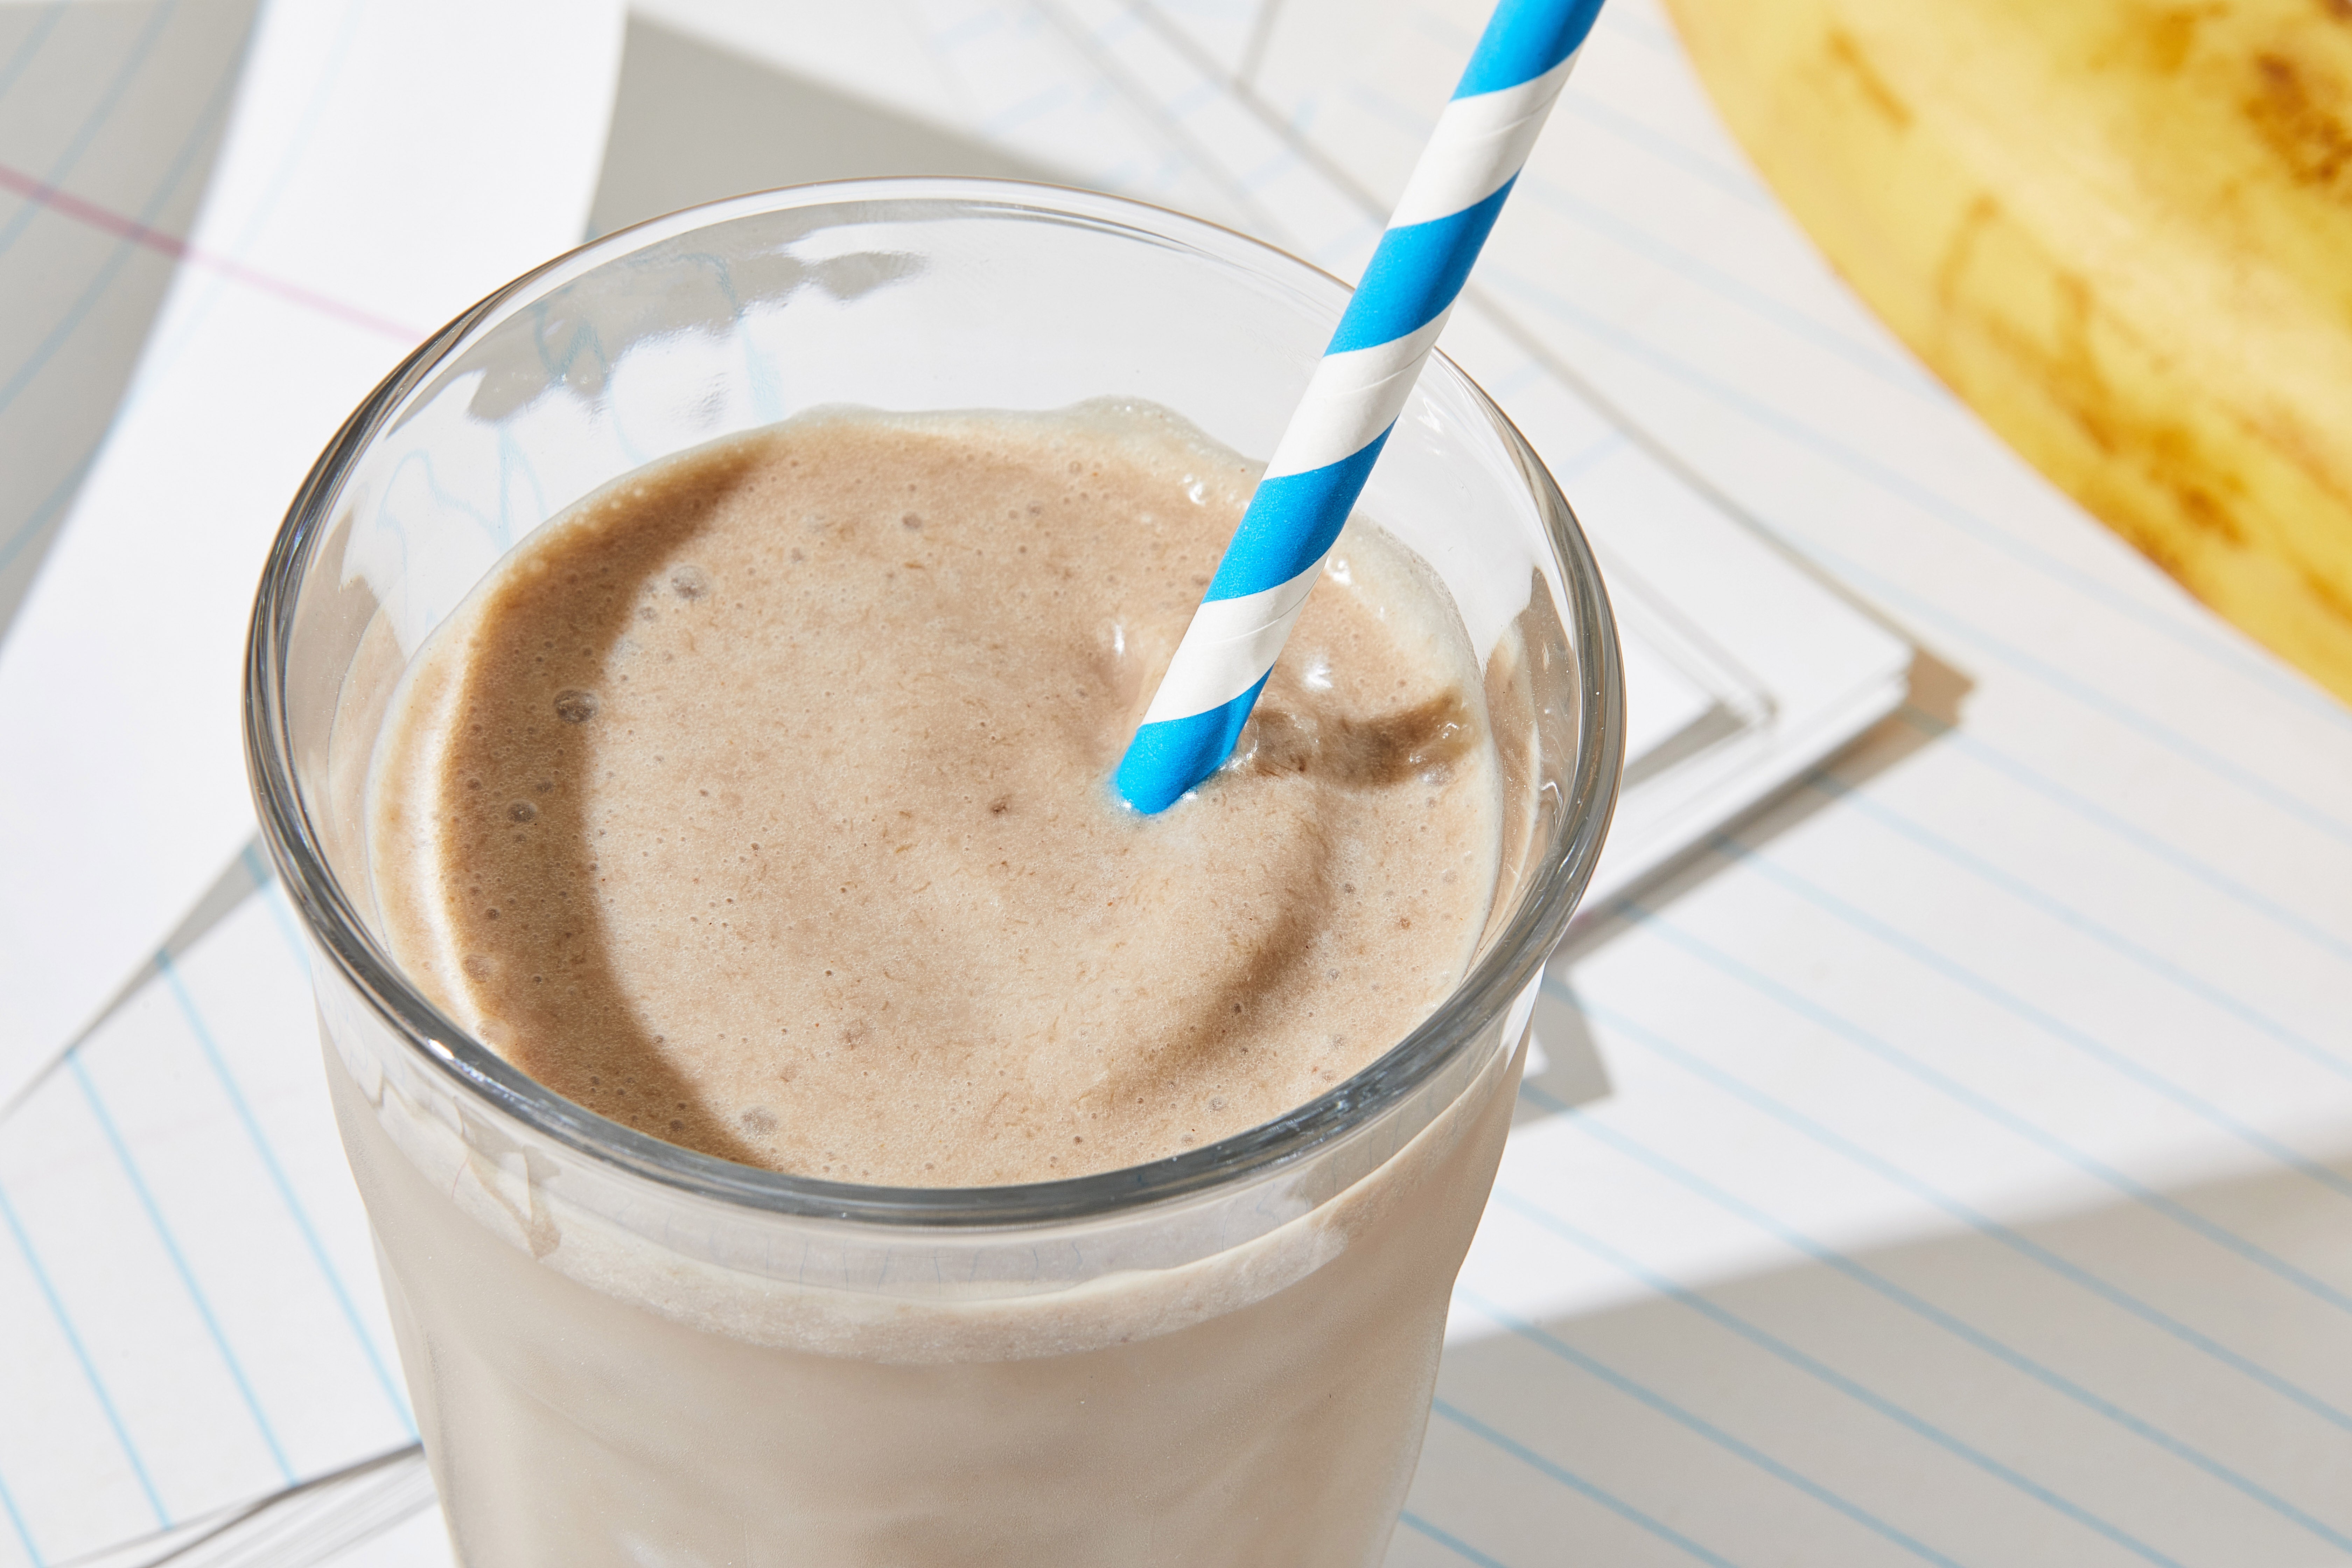 Three-ingredient peanut butter and banana smoothie